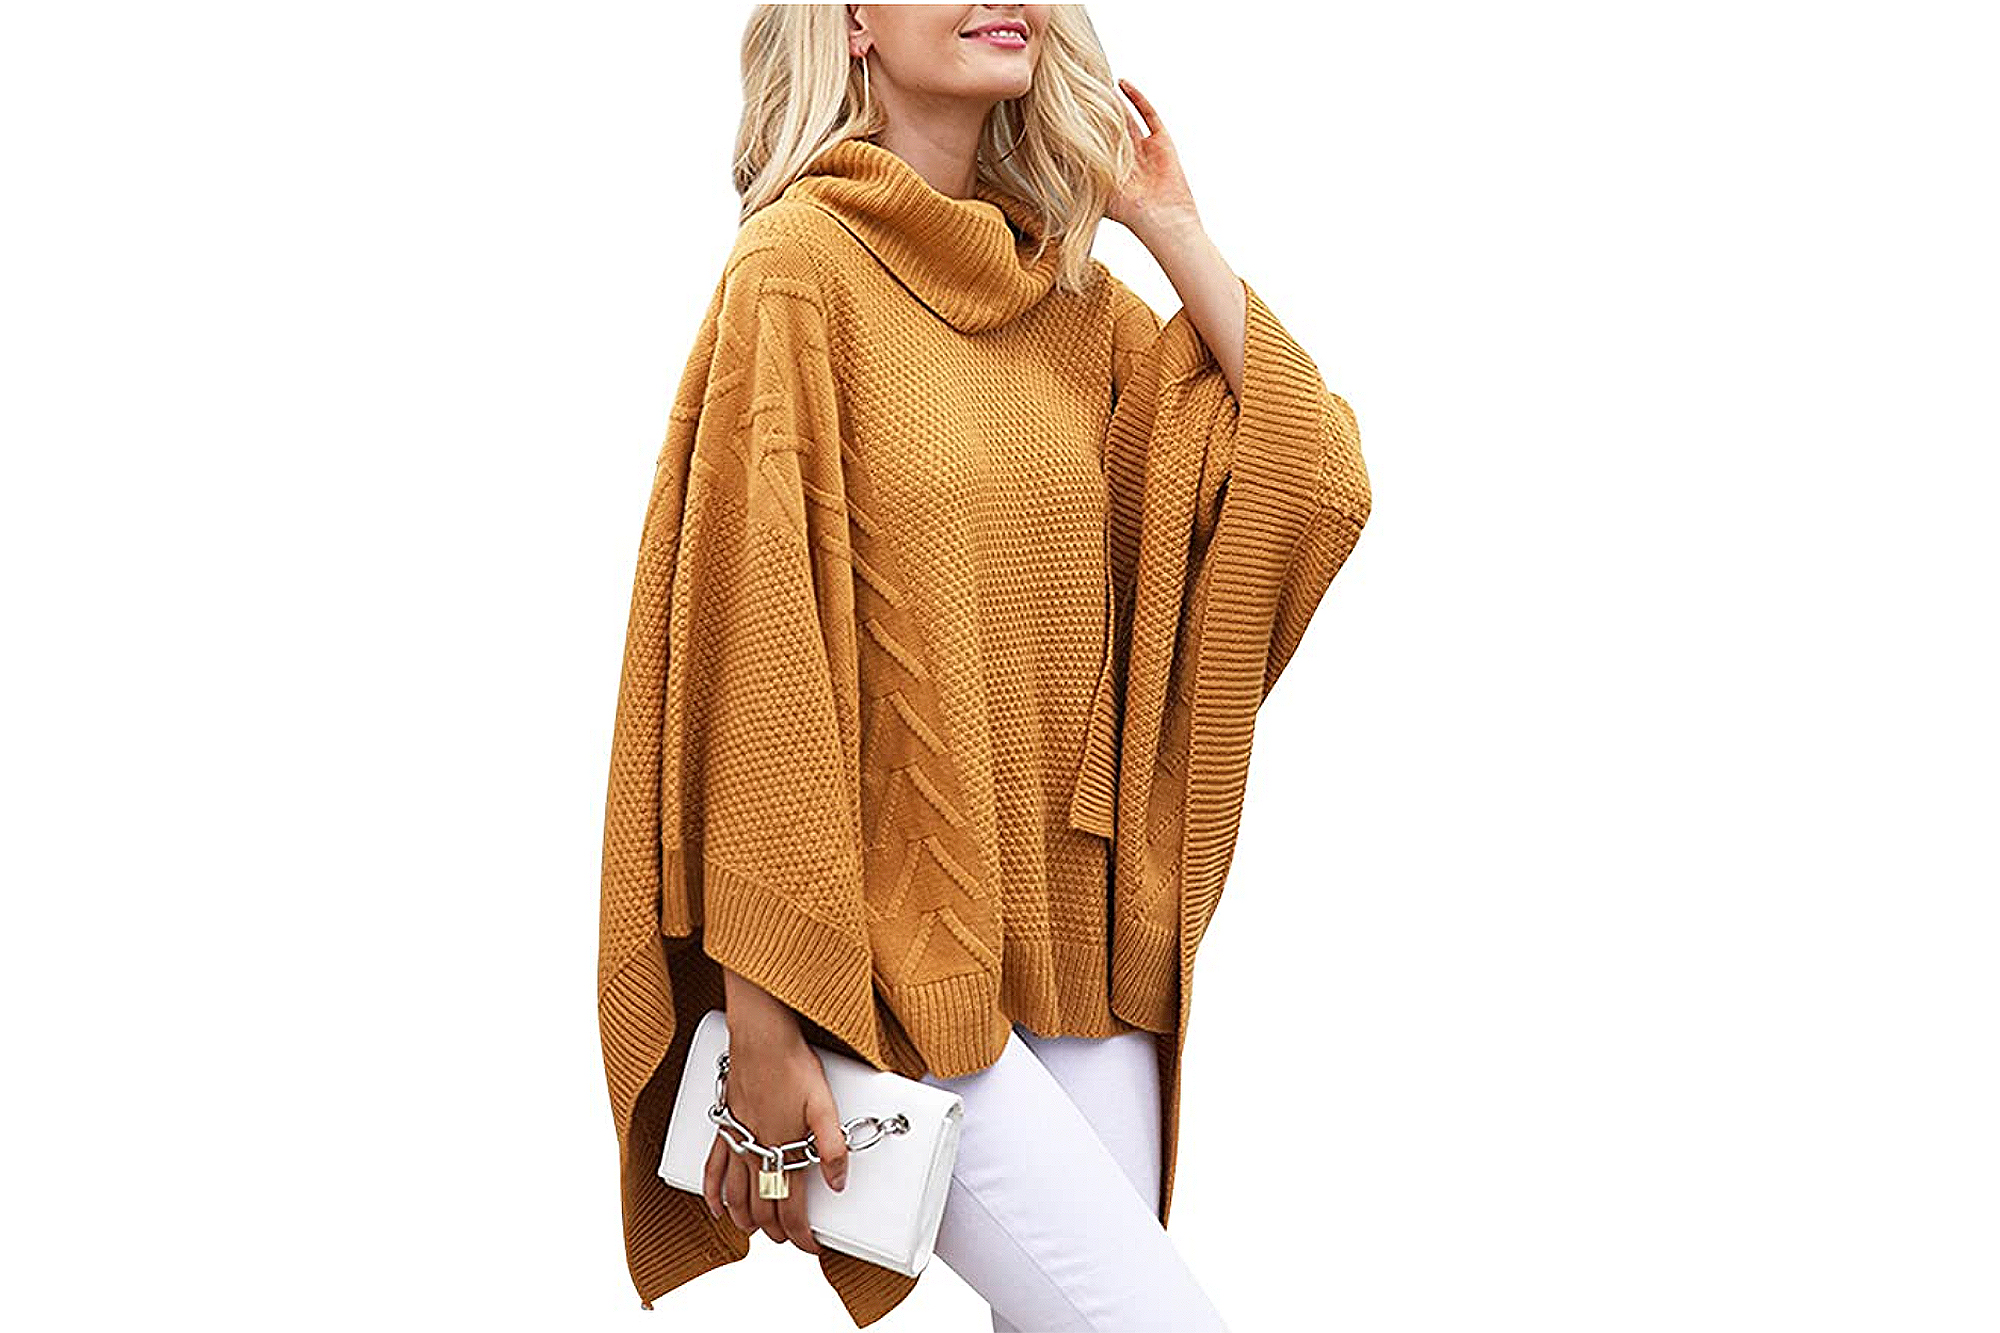 BerryGo Roomy Knit Poncho Sweater Is a Casual Fall Fashion Staple